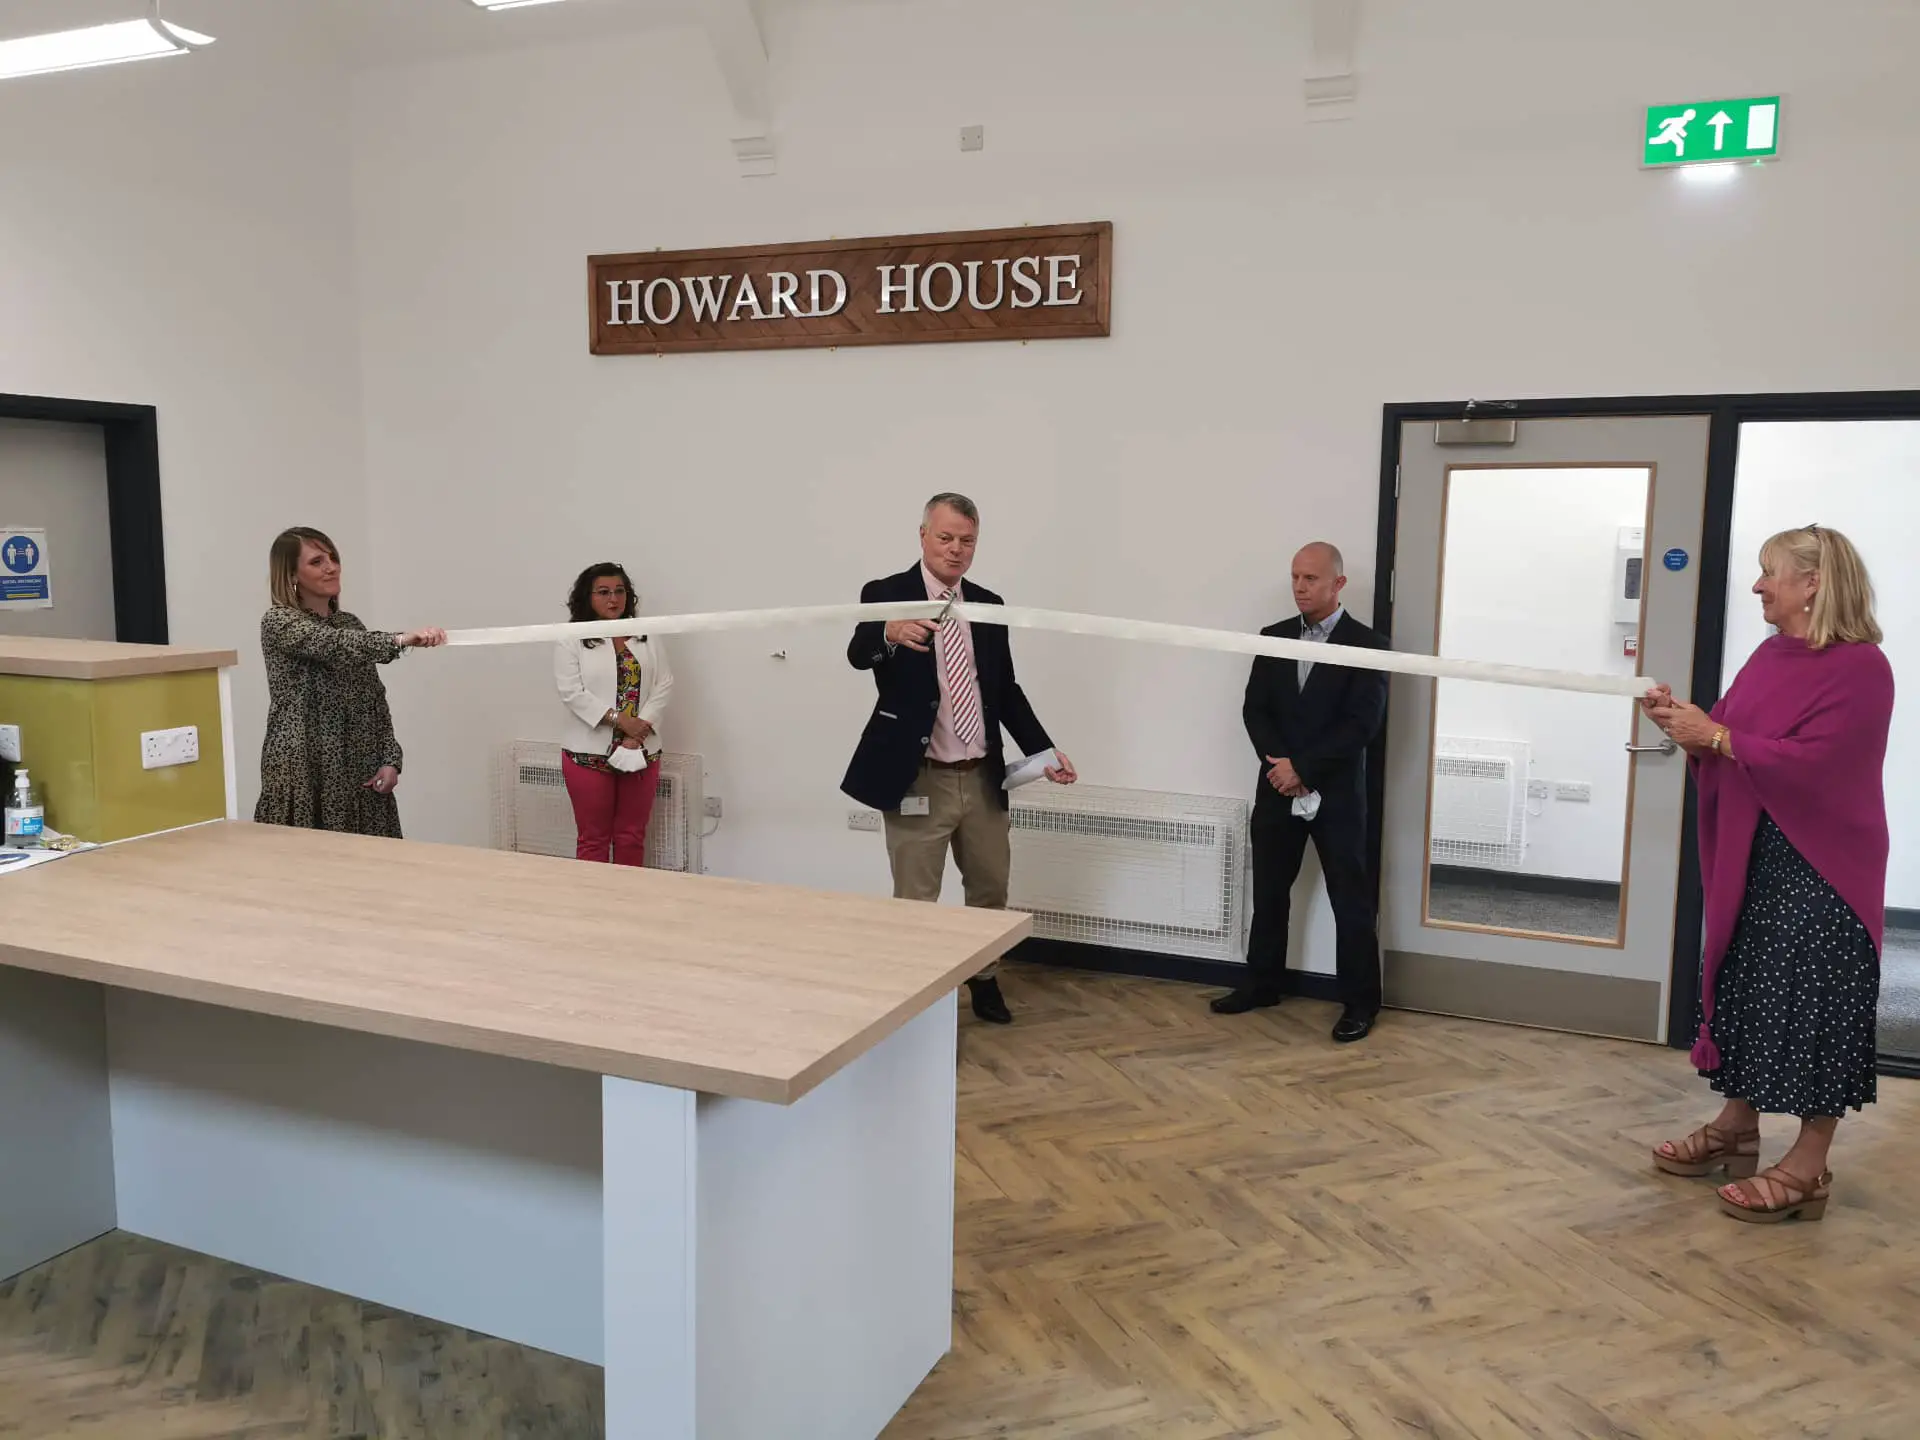 Isle of Wight homeless assessment hub - the grand opening